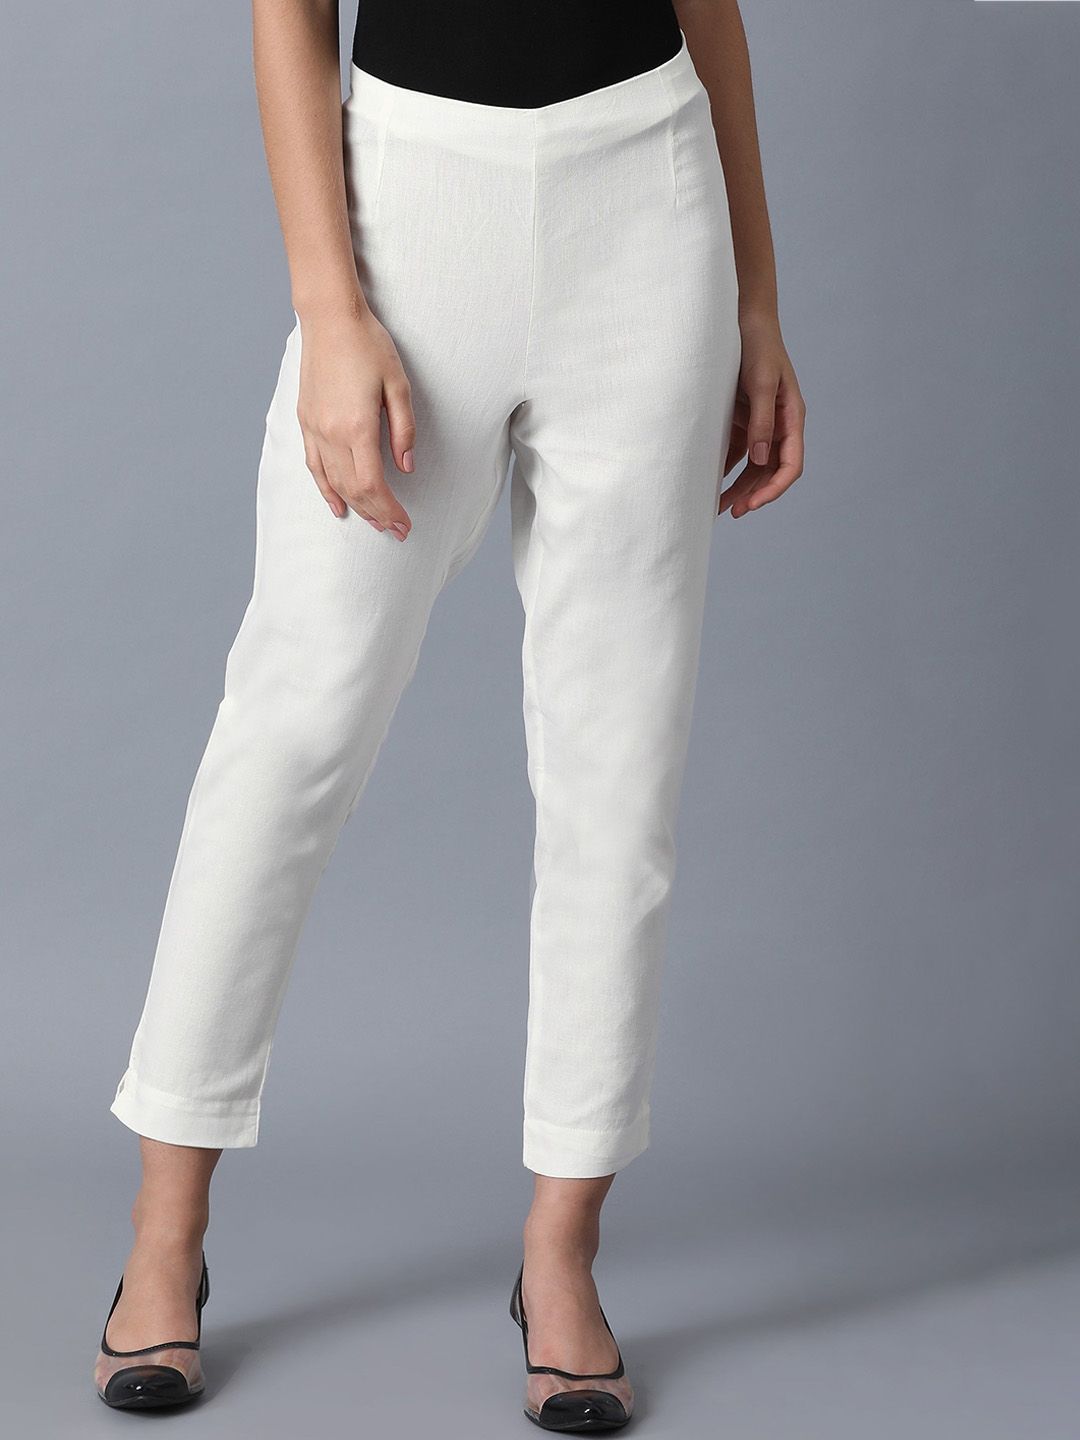 W Women White Slim Fit Trousers Price in India